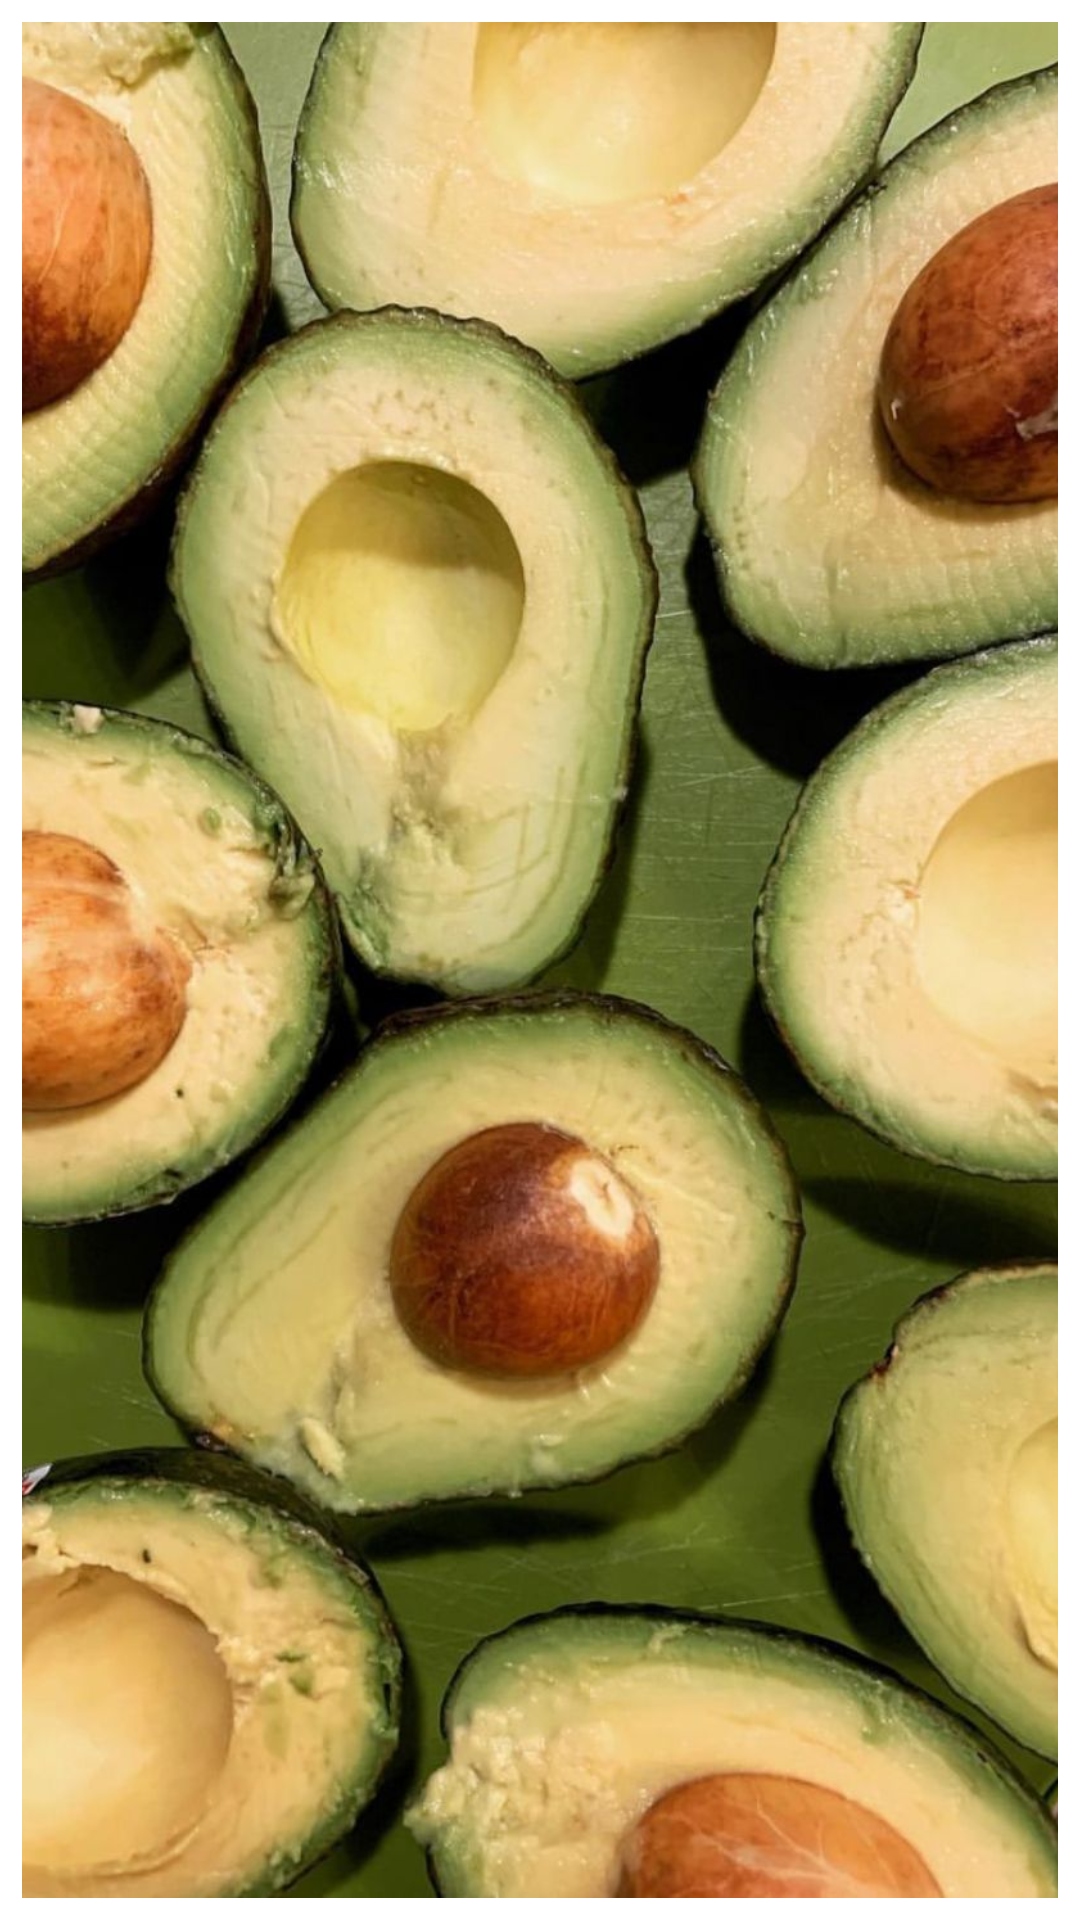 Avocados: A weight loss tool